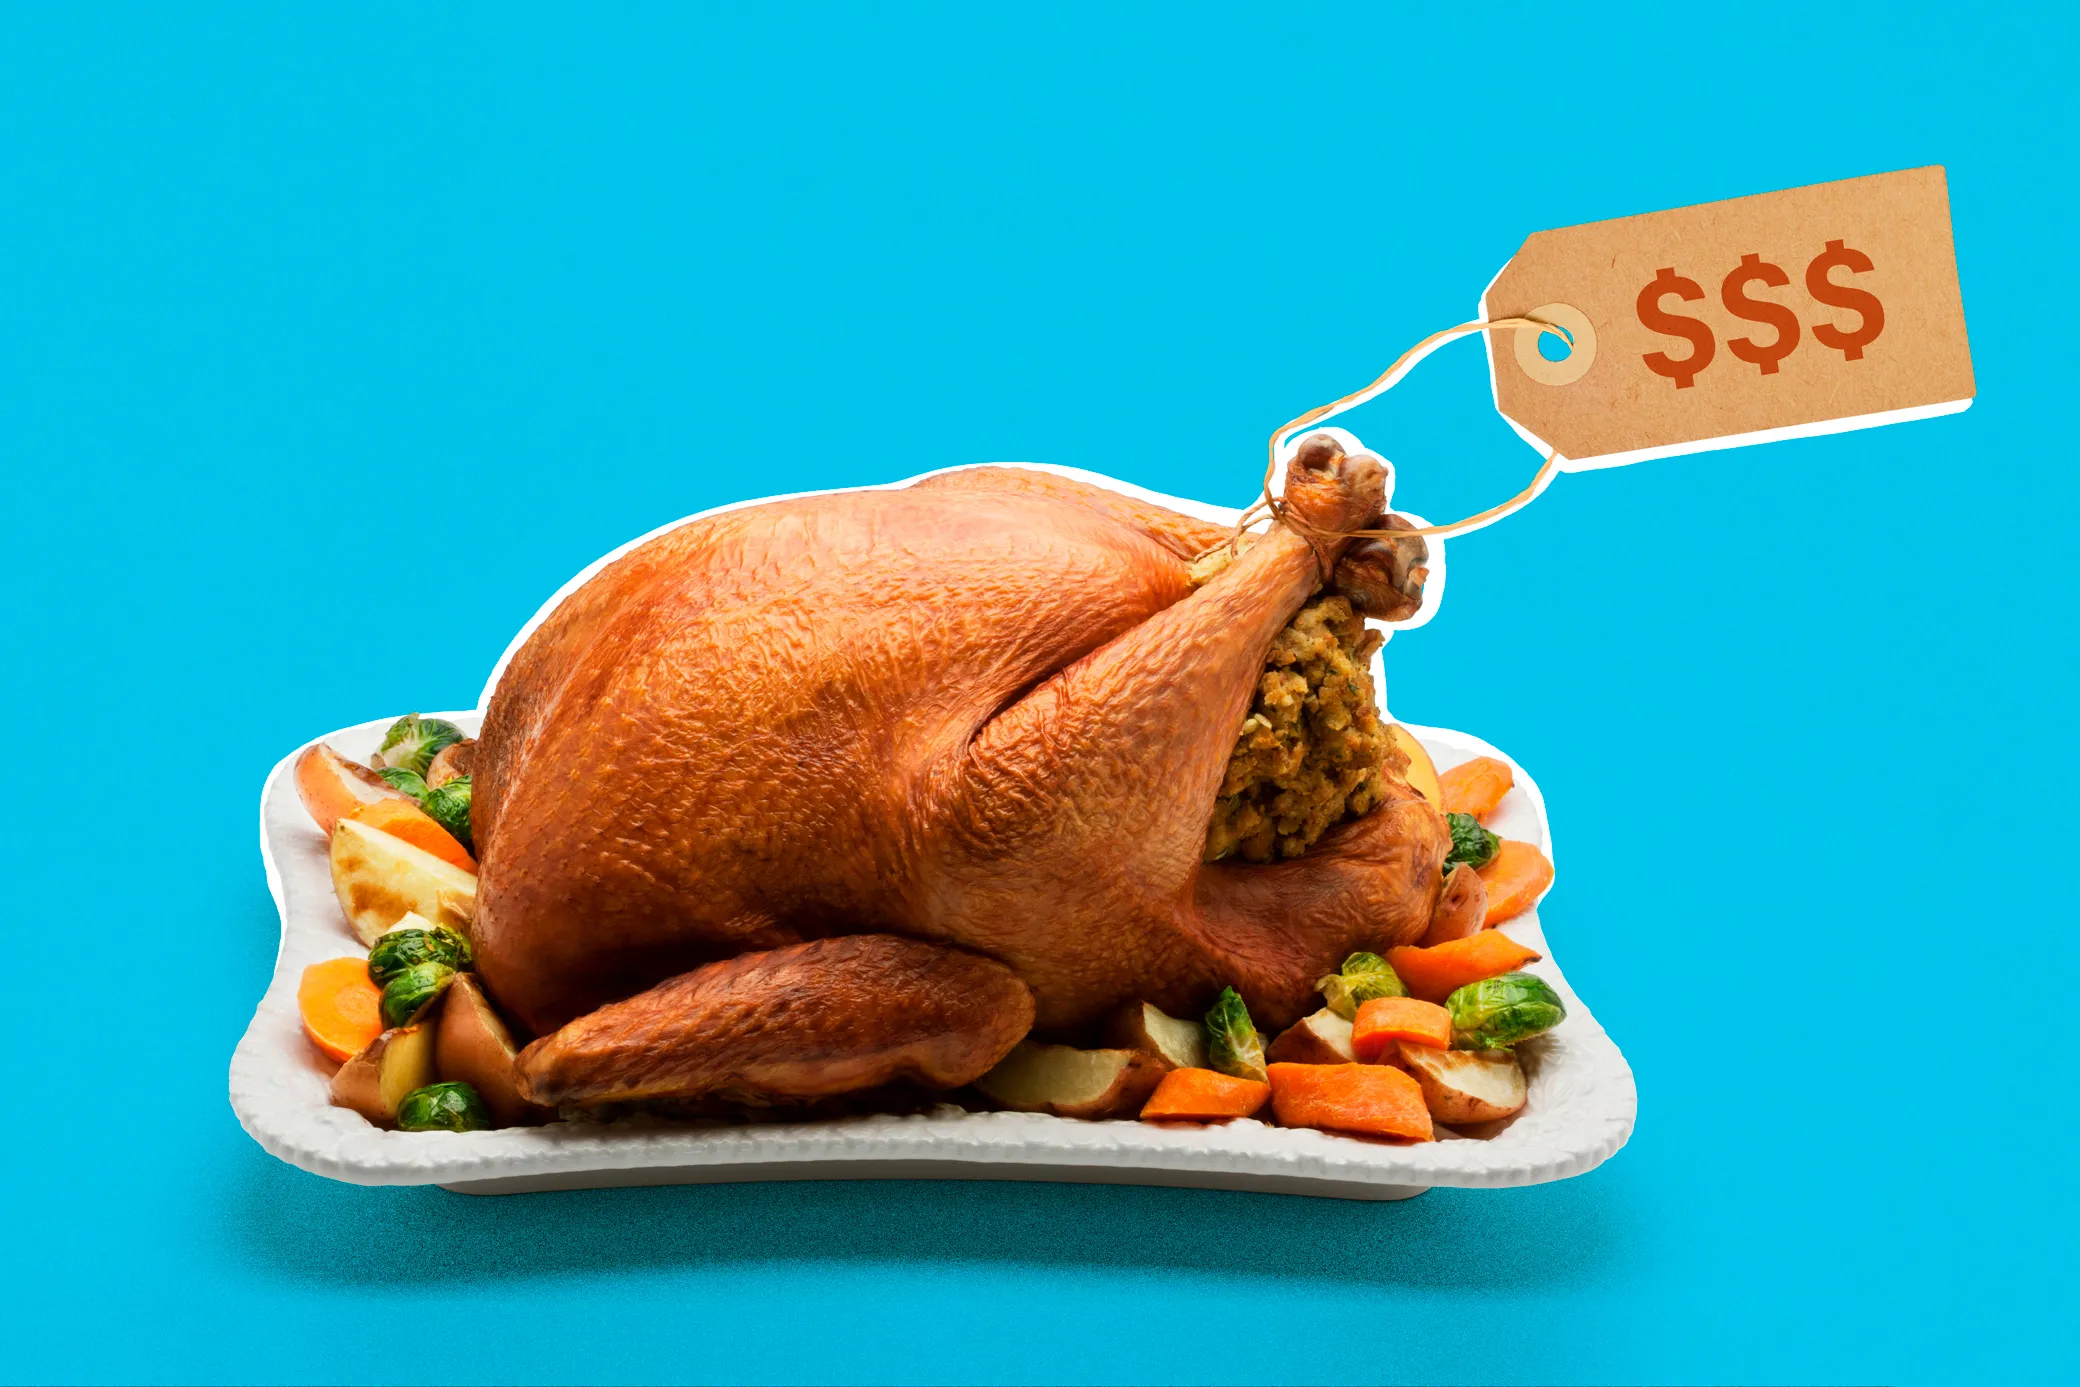 Inflation Isn't the Only Reason Your Turkey Will Cost More This Thanksgiving